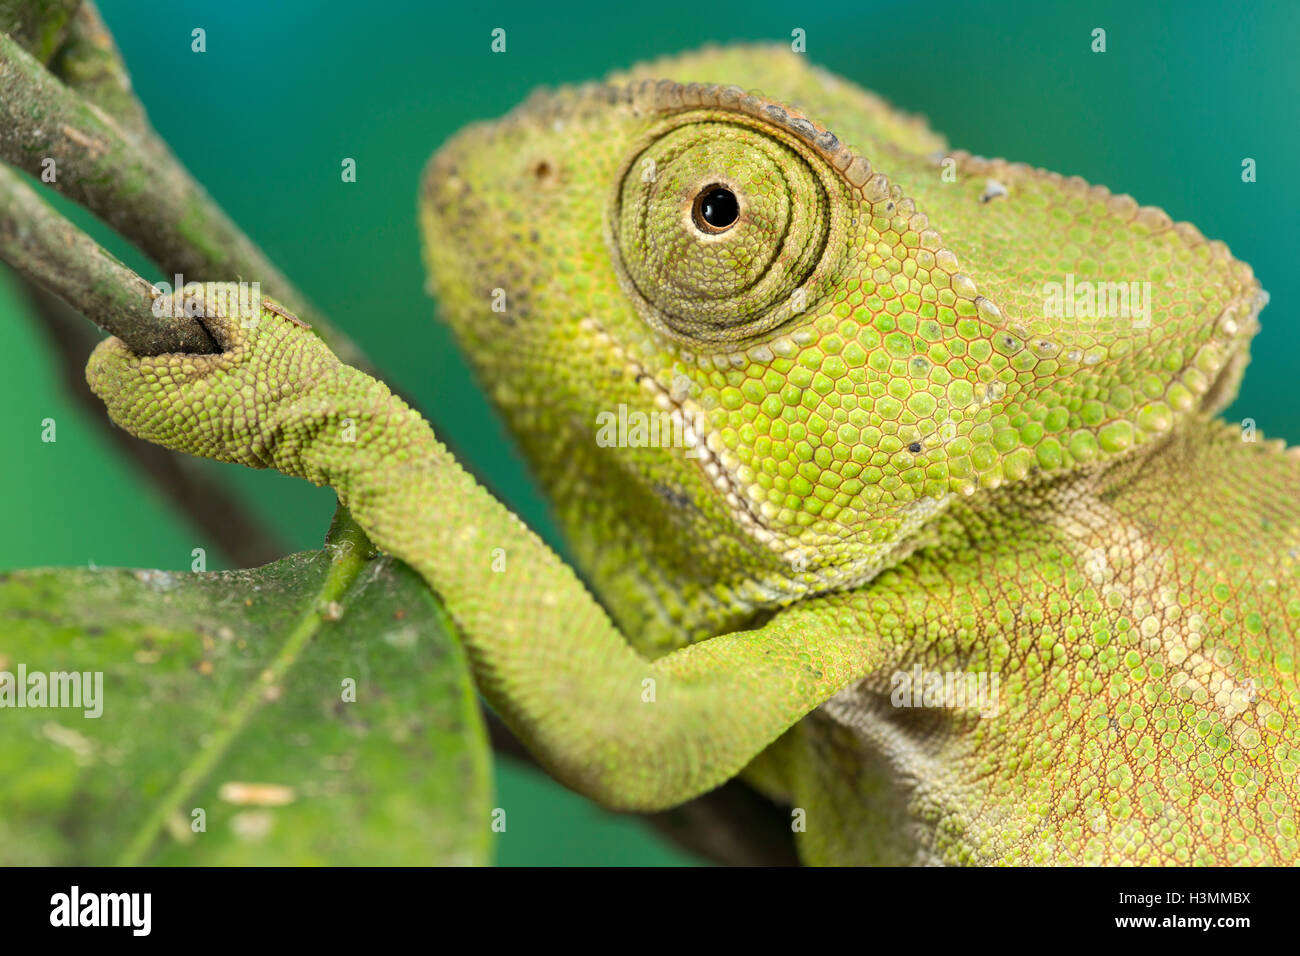 Close up of a green medium sized chameleon Stock Photo